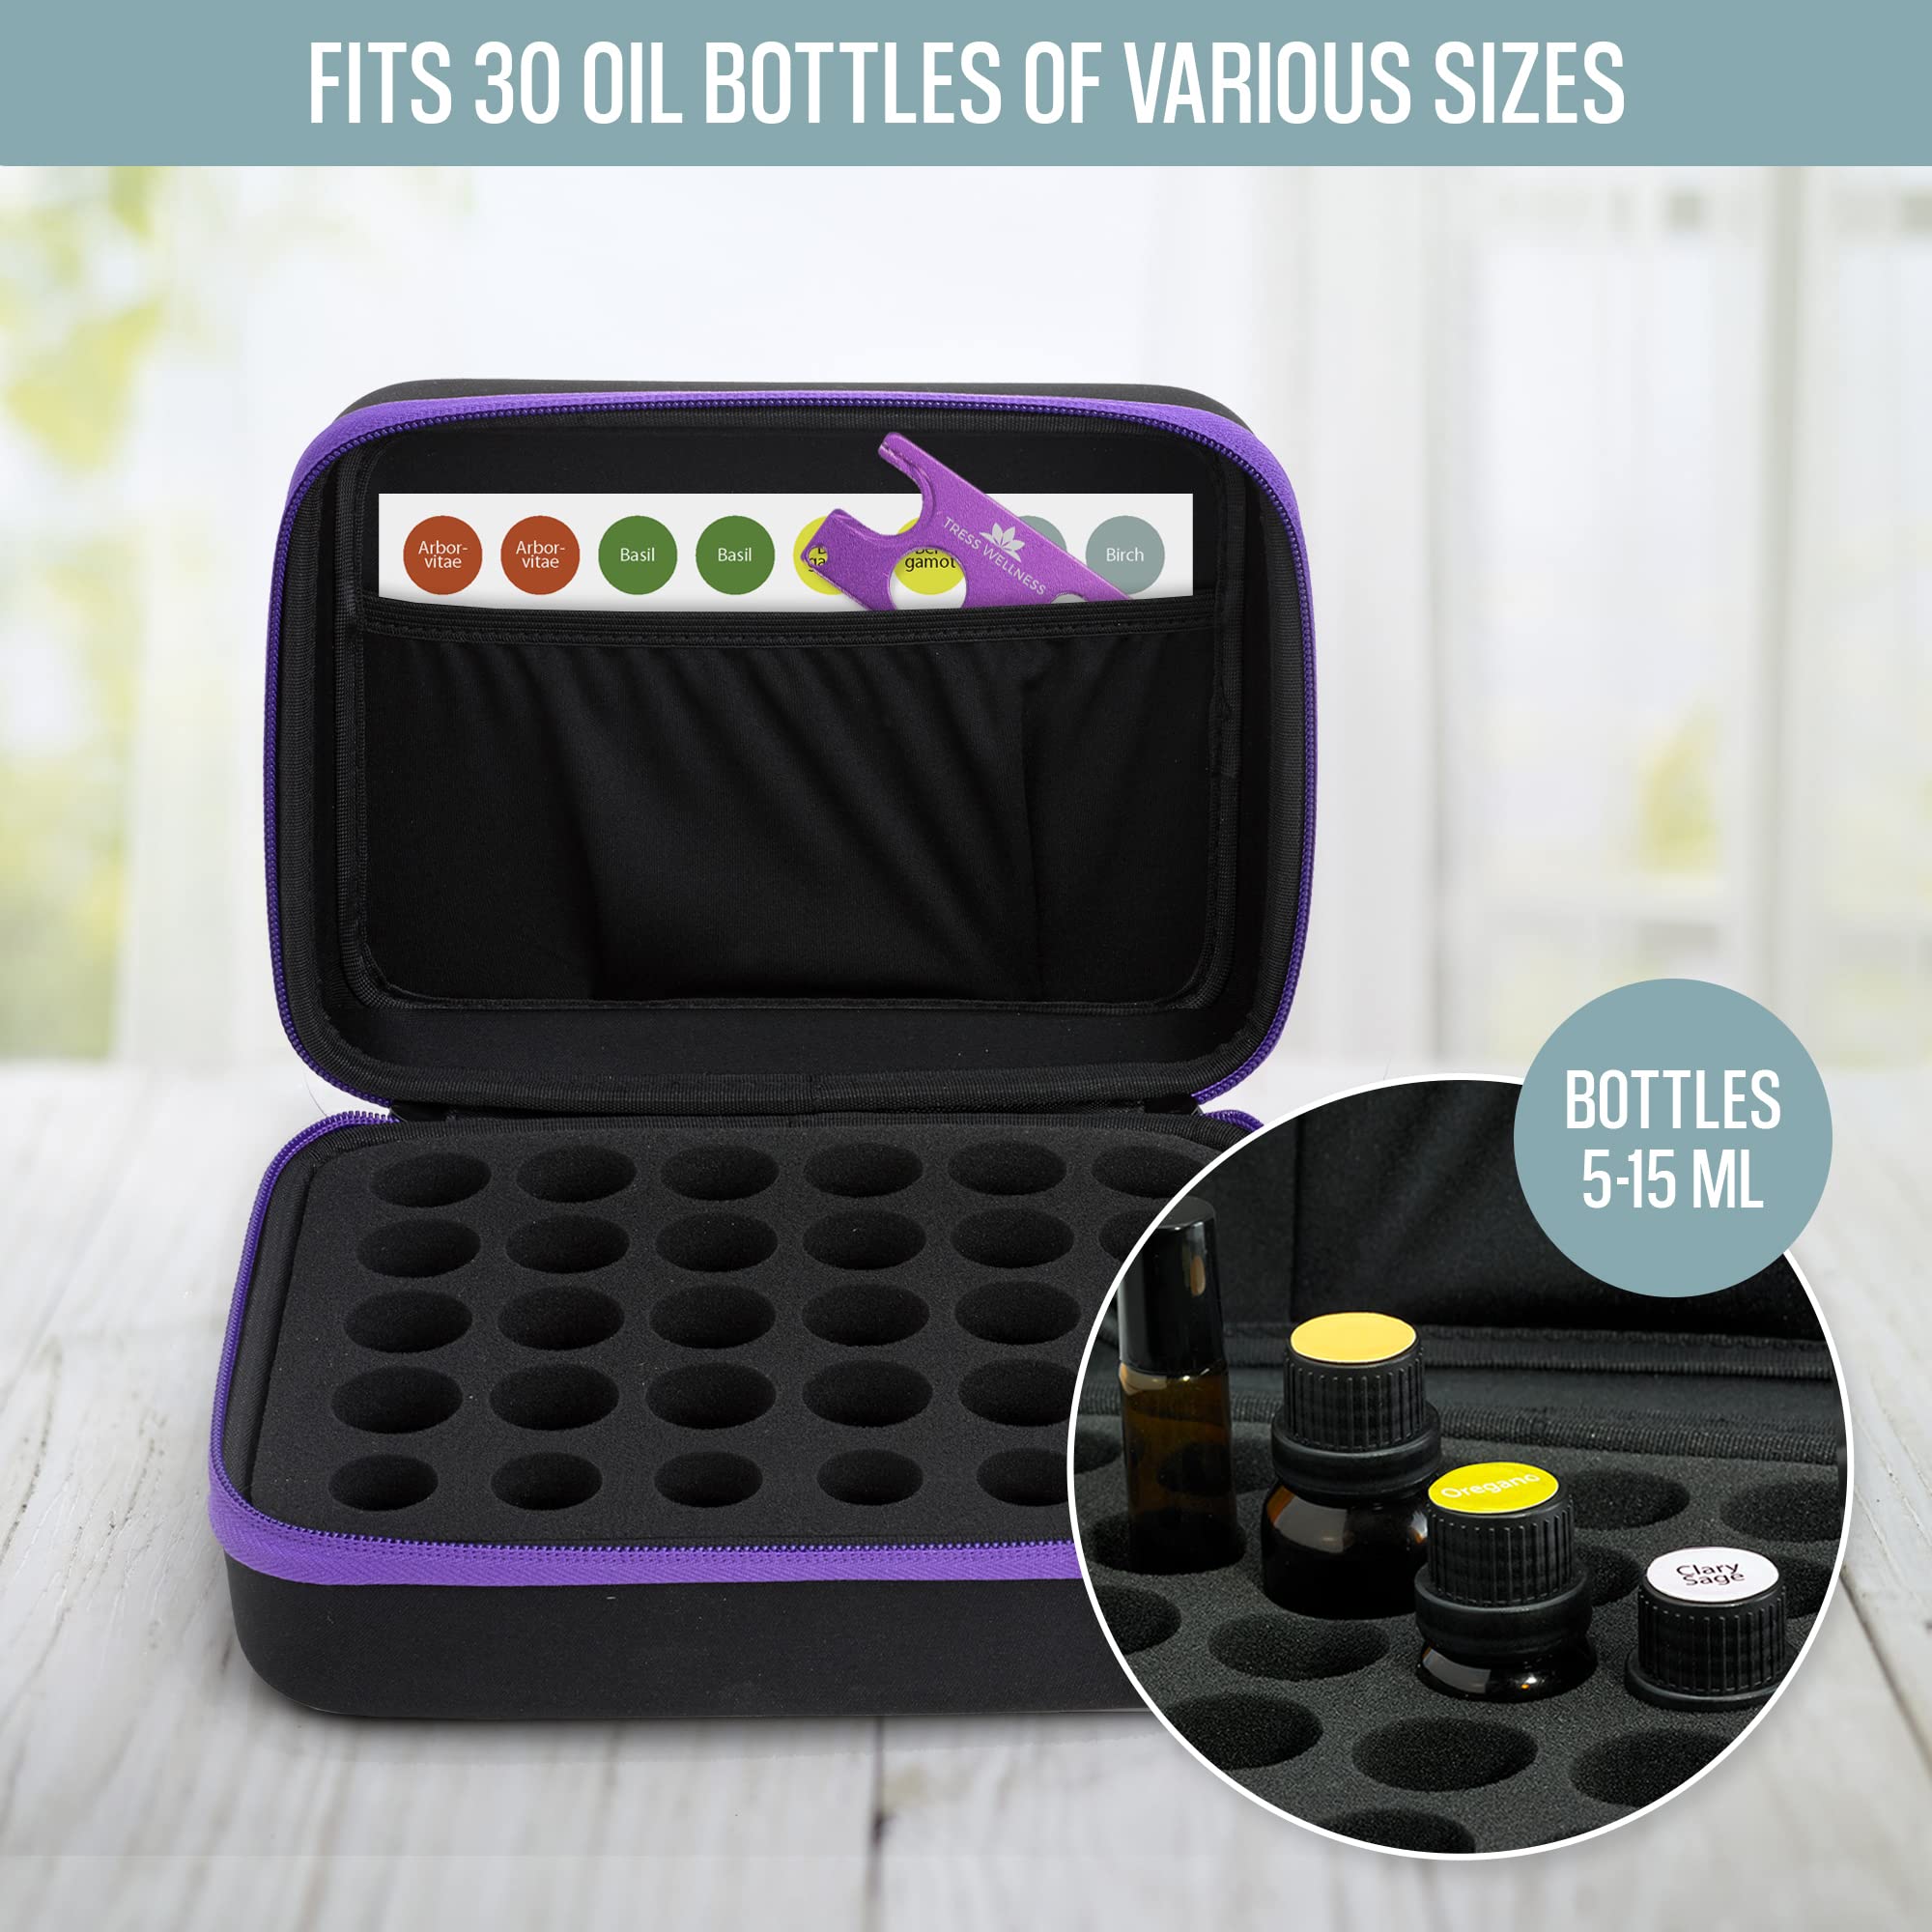 Tress Wellness Essential Oil Spa Storage System for 30 Bottles holds 10 15 ml - Holds Young Living & Doterra Containers